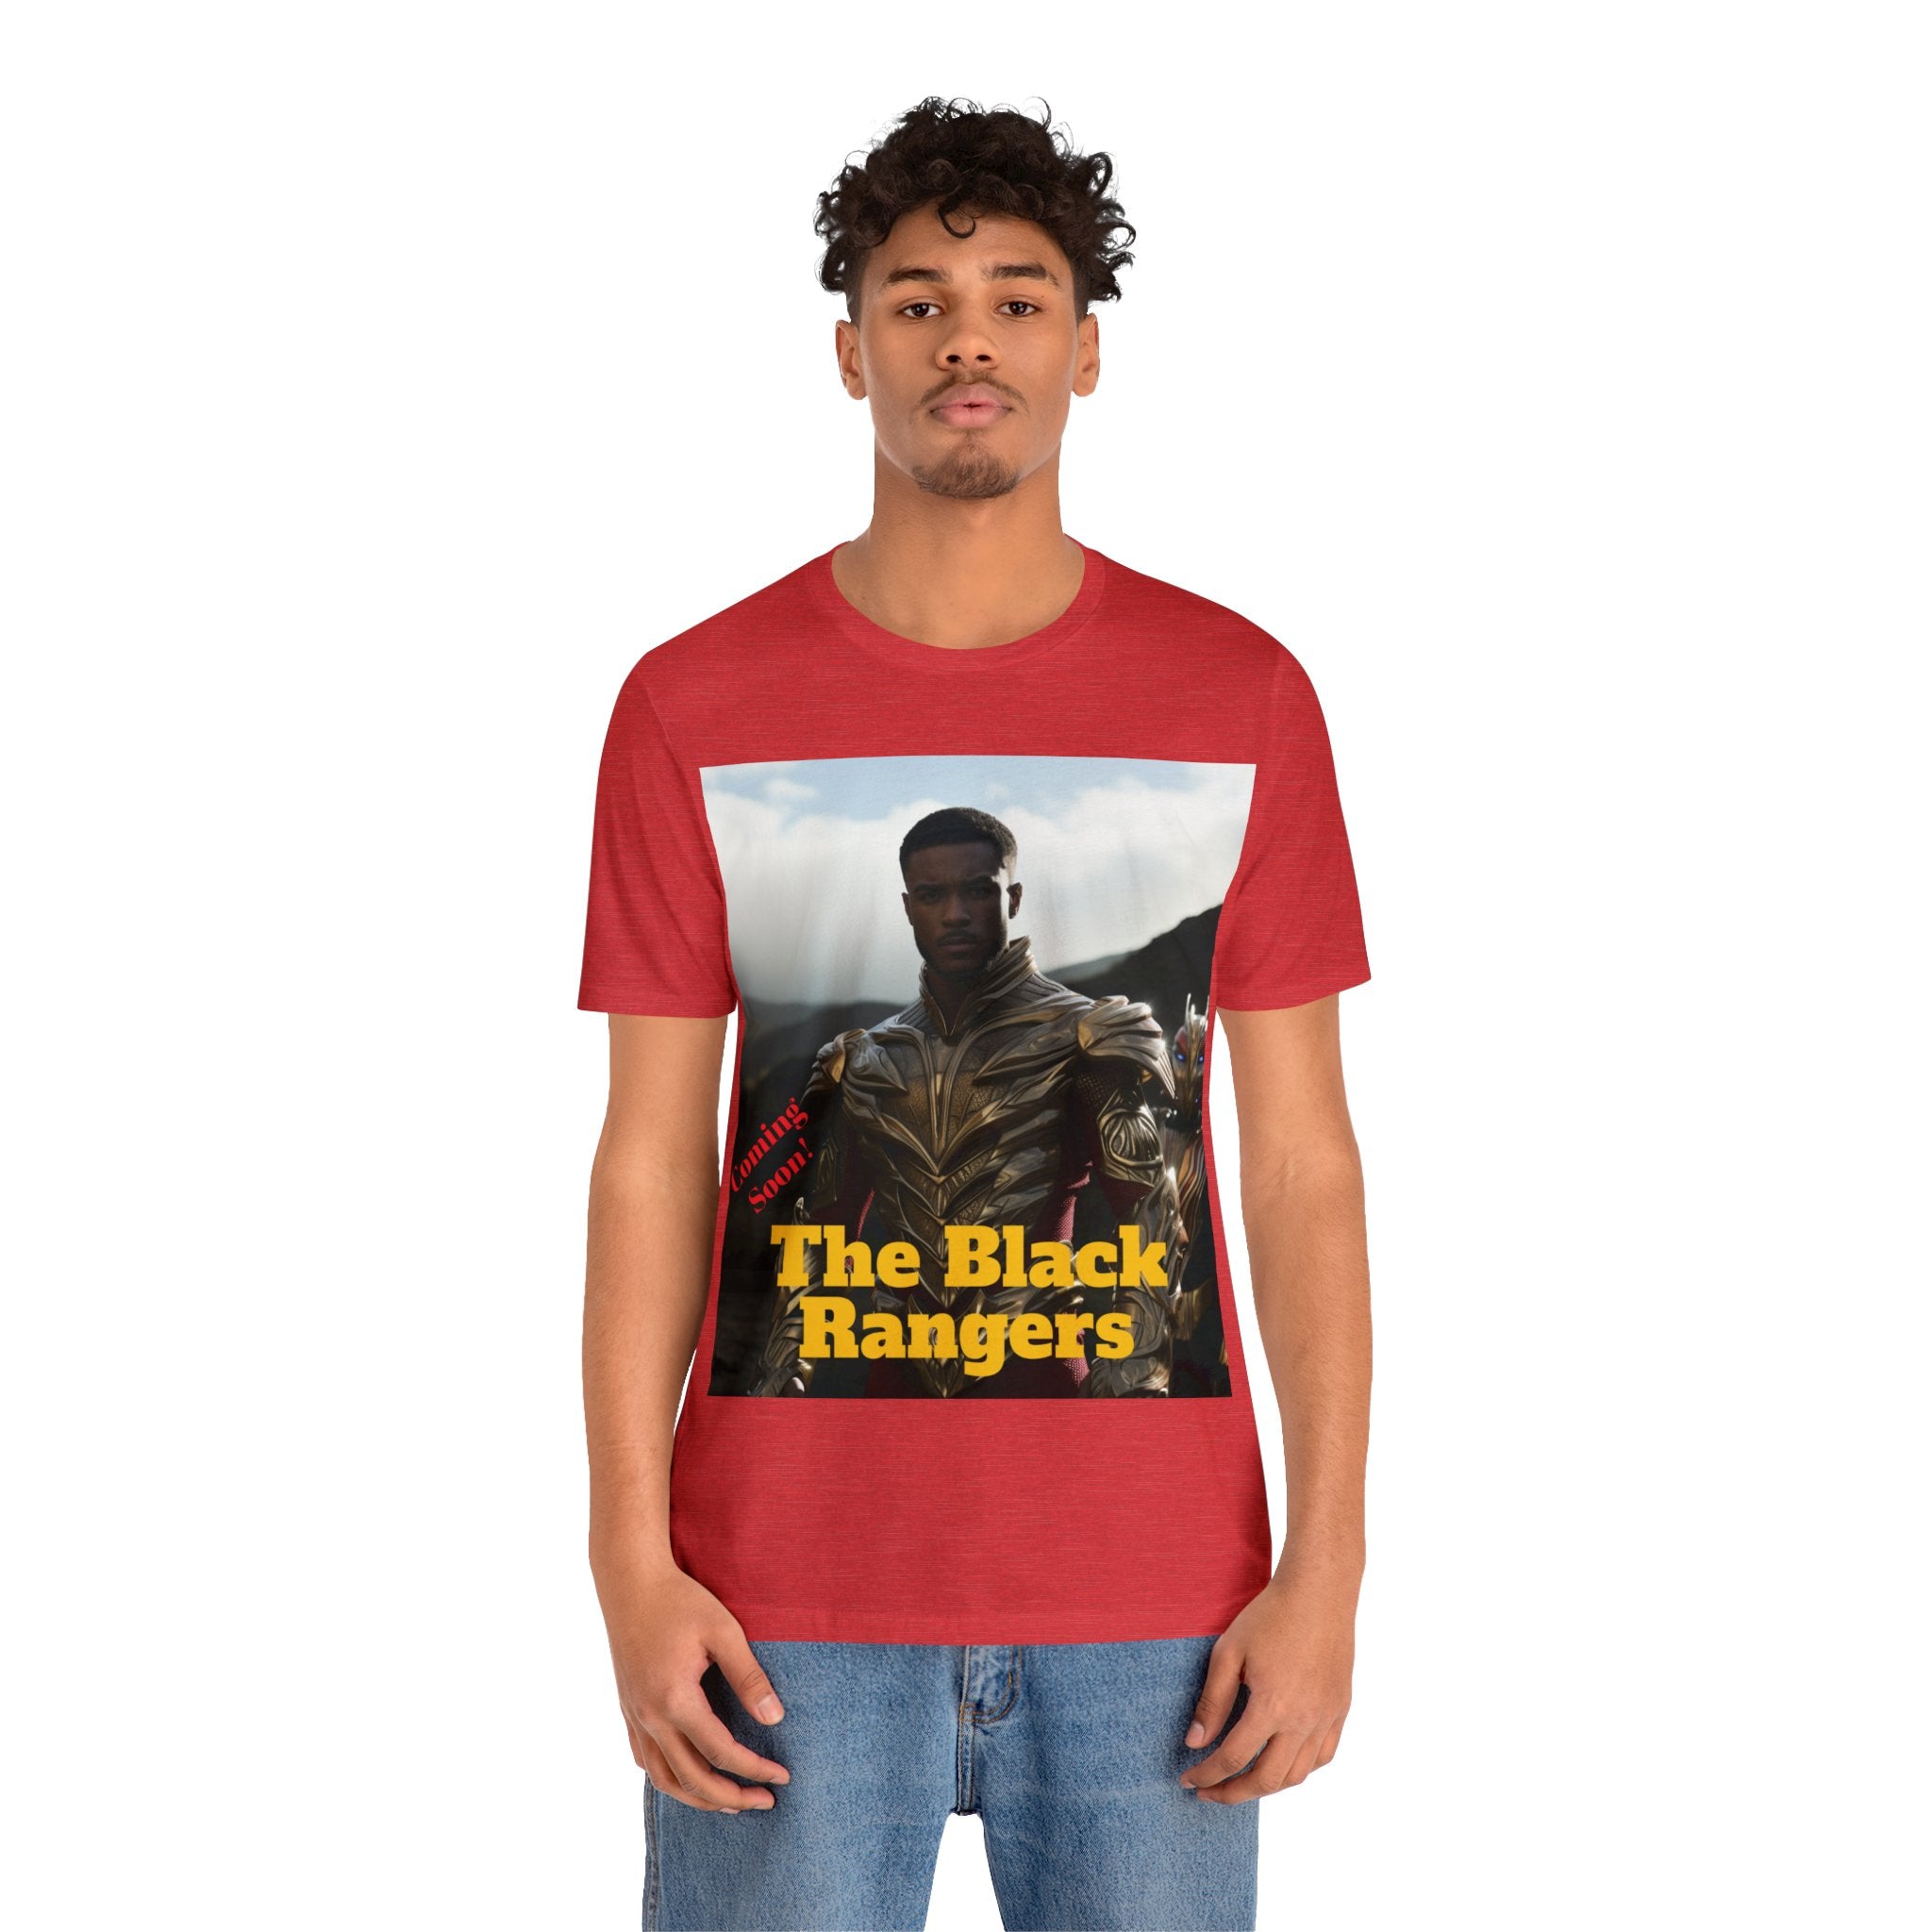 🦸🏾‍♂️ Empower Your Wardrobe with Heroic Inspiration: Introducing "The Black Rangers: Afro-American Excellence" Unisex Jersey Short Sleeve Tee. This Power Rangers inspired shirt celebrates the strength, diversity, and resilience of the Afro-American community, merging the excitement of superhero lore with cultural pride.